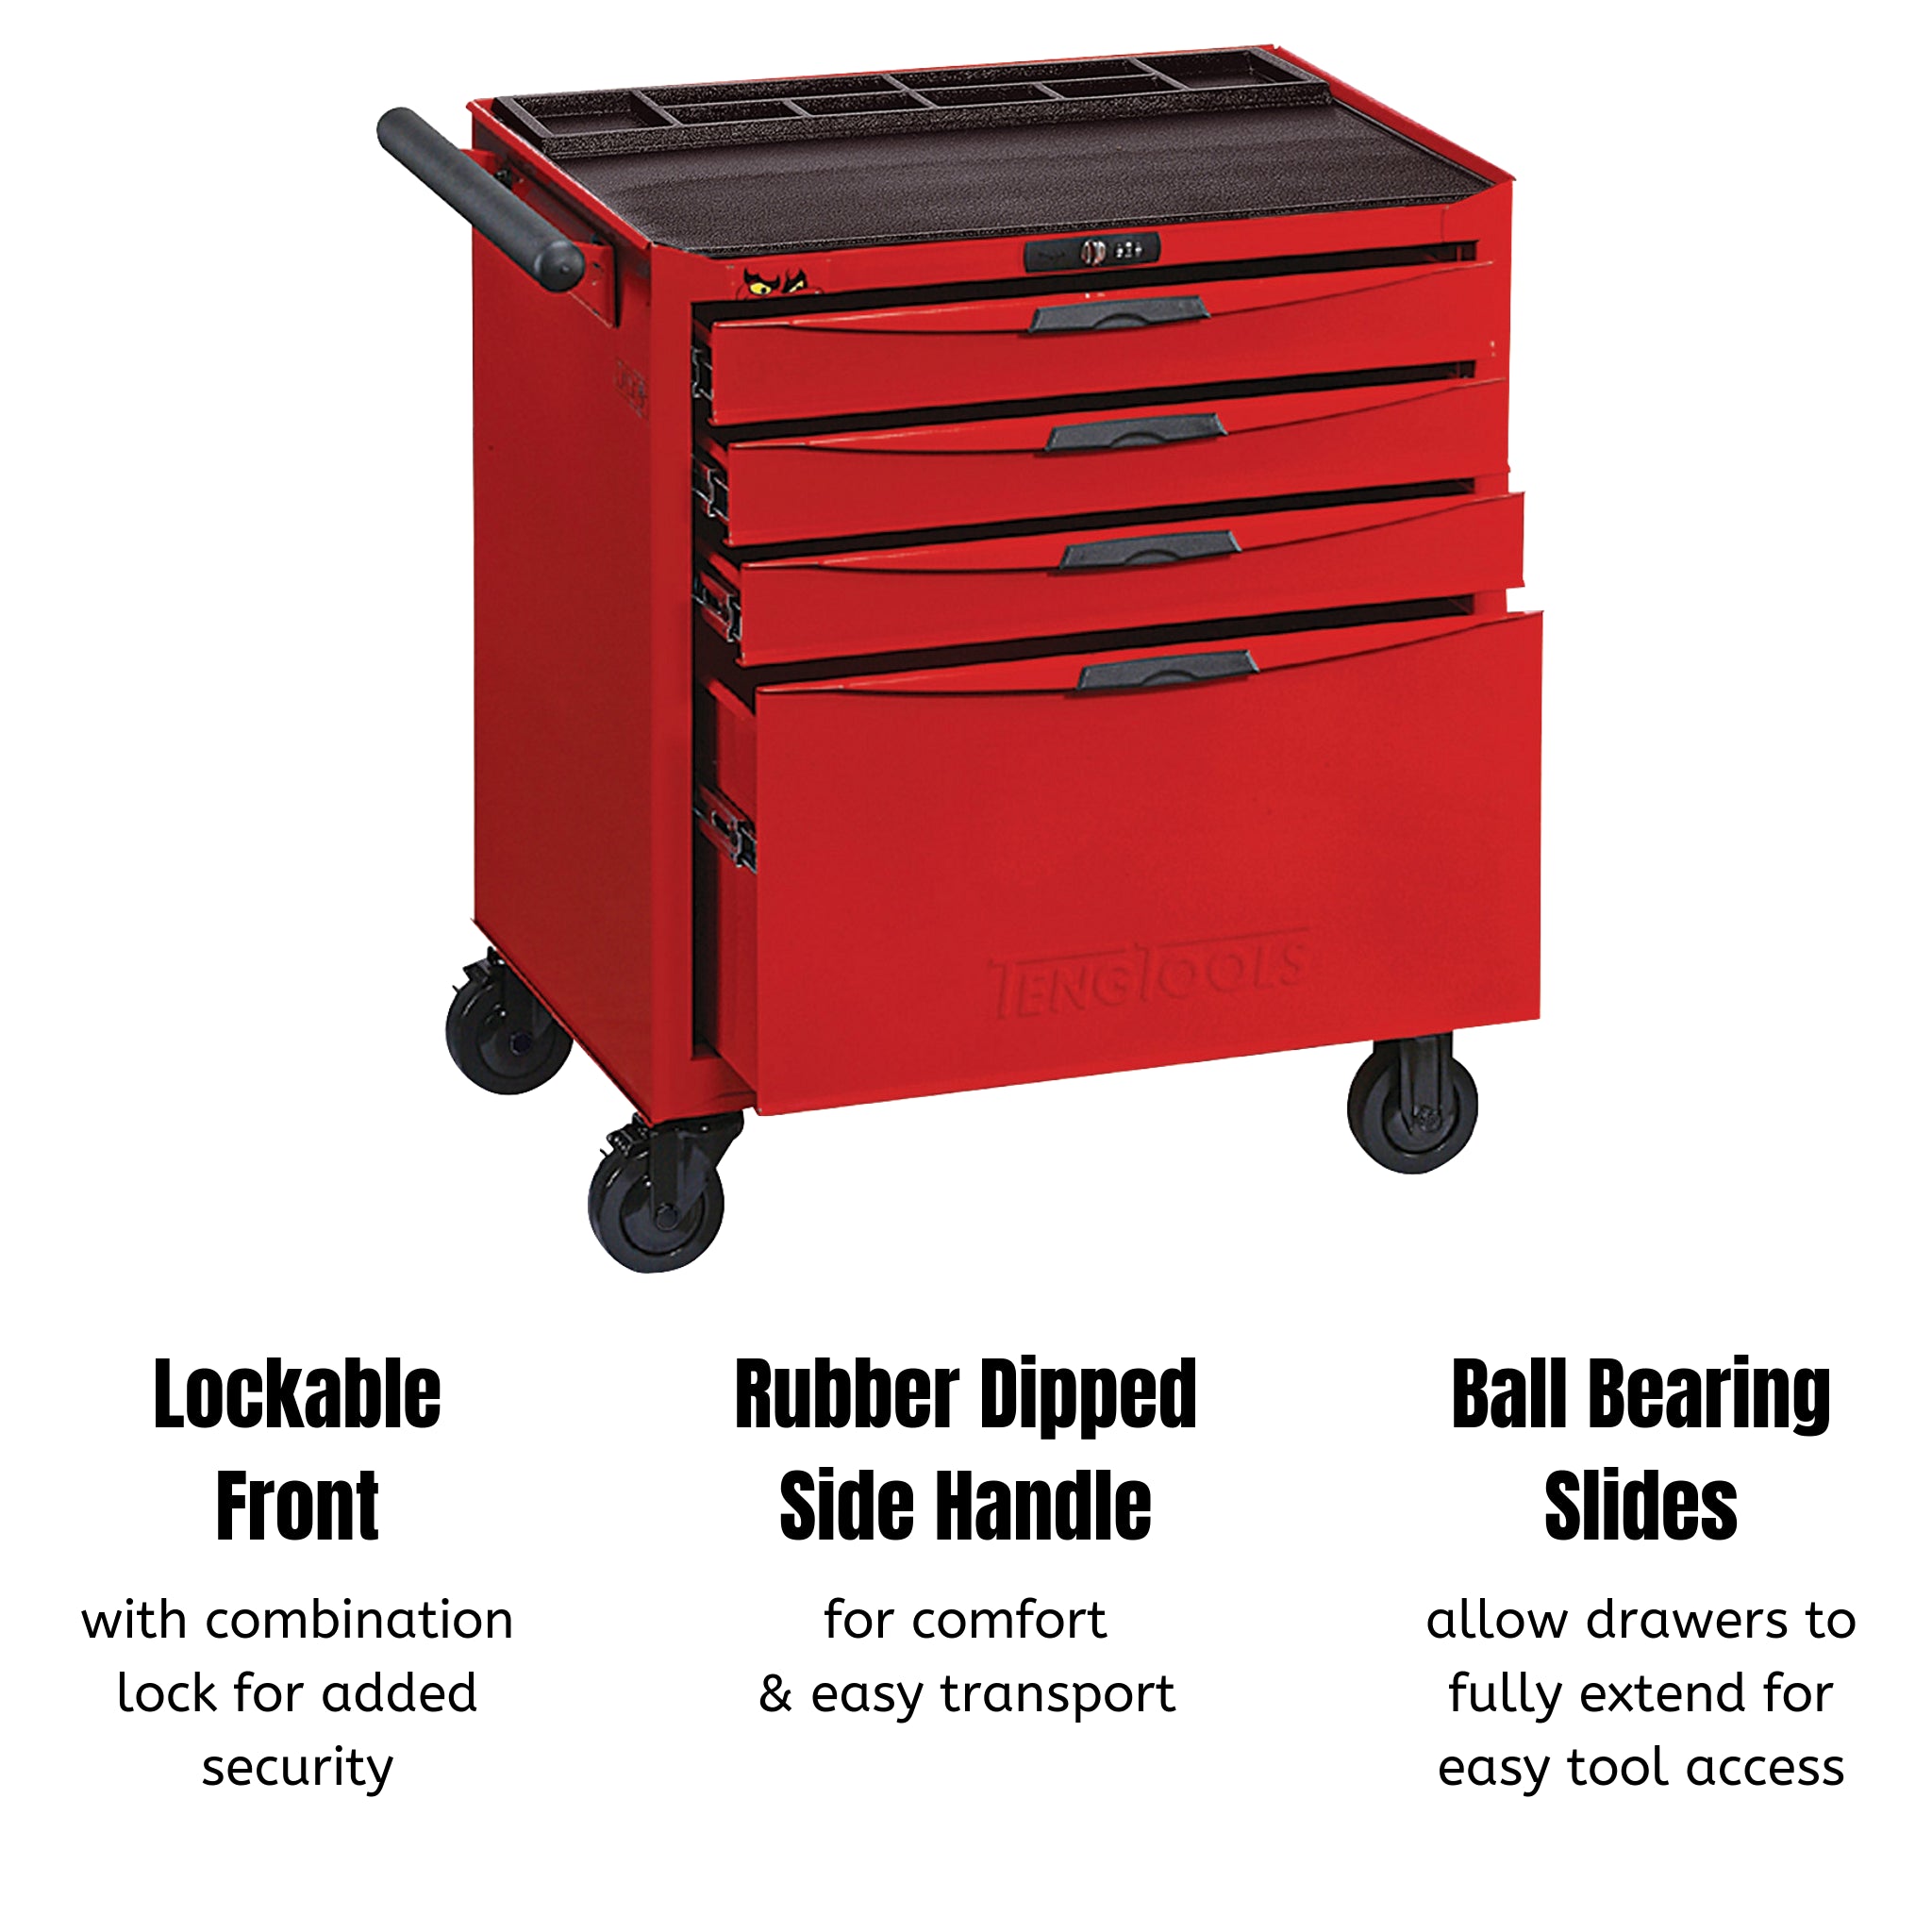 Teng Tools 4 Drawer Heavy Duty Roller Cabinet Tool Chest / Wagon - TCW804N